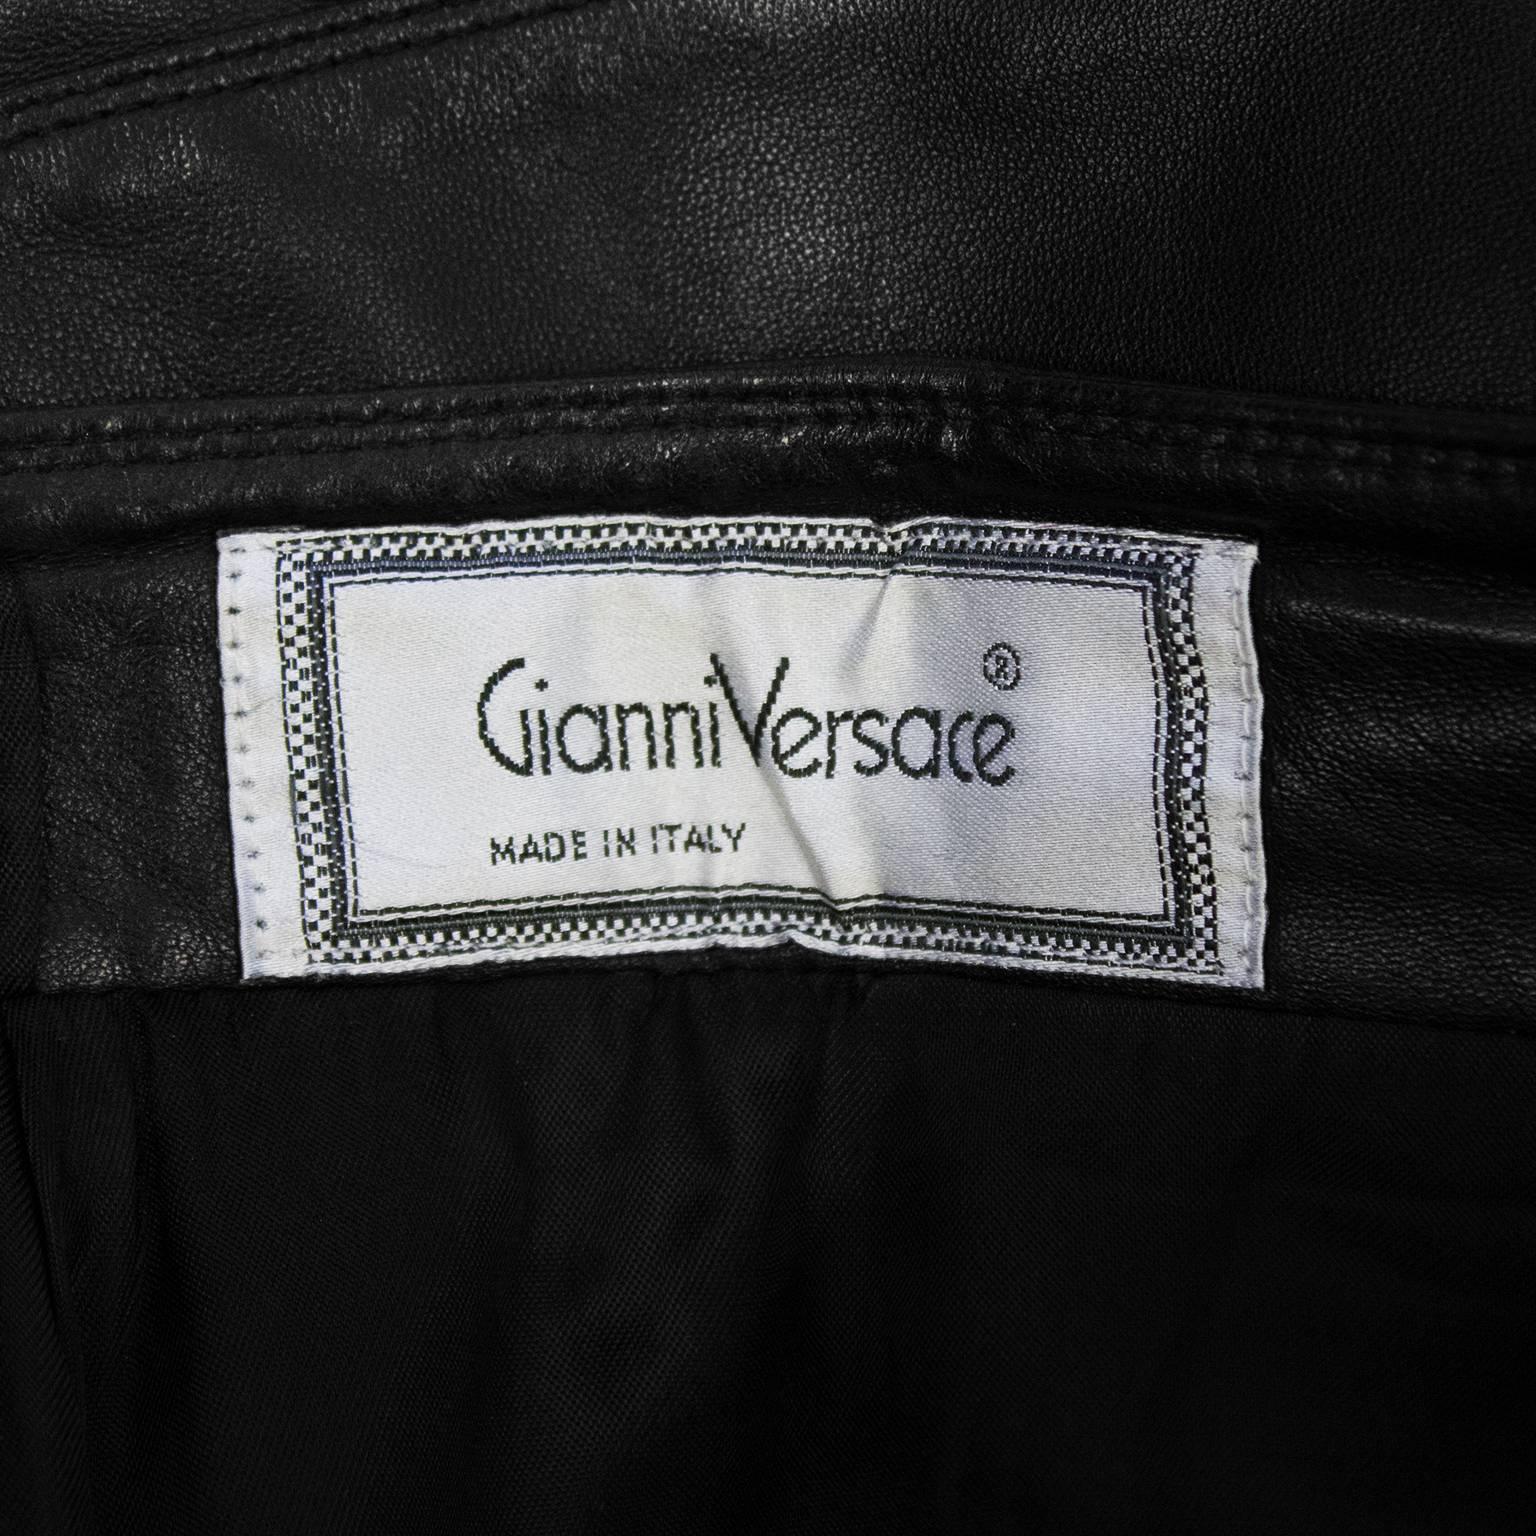 1980's Gianni Versace Black Leather Skirt with Tiered Hem Detail In Excellent Condition For Sale In Toronto, Ontario